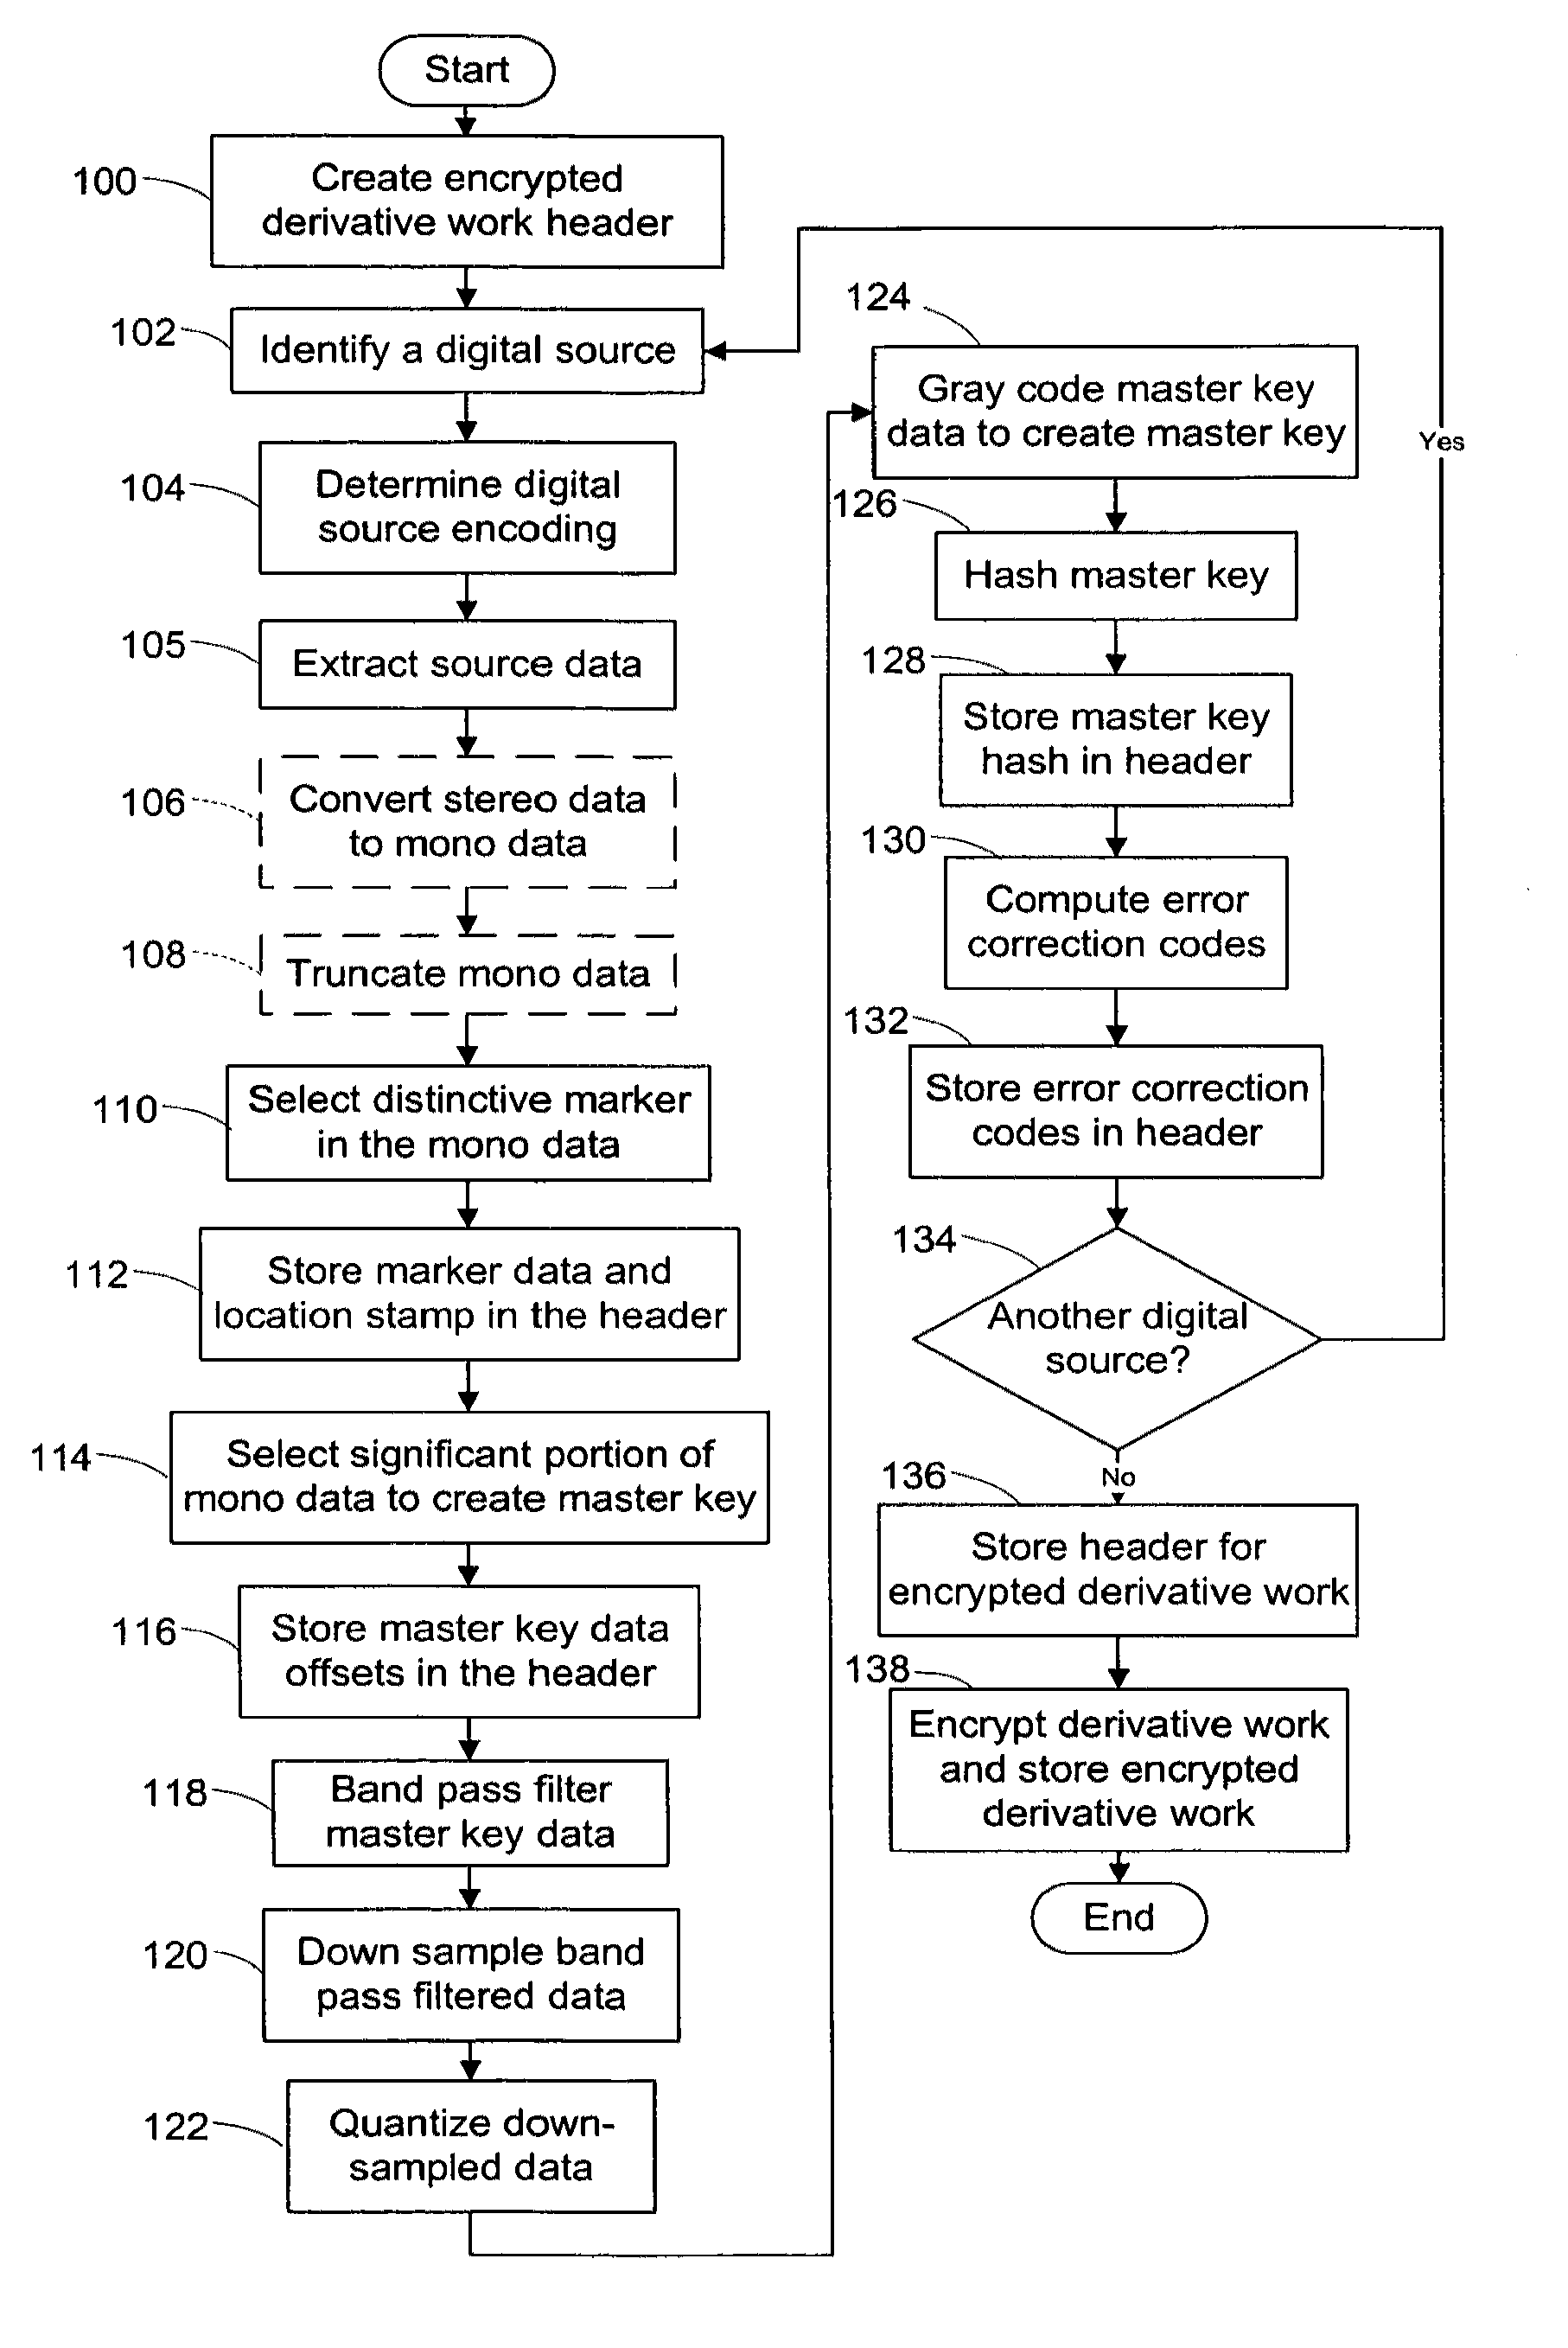 System and method of generating encryption/decryption keys and encrypting/decrypting a derivative work